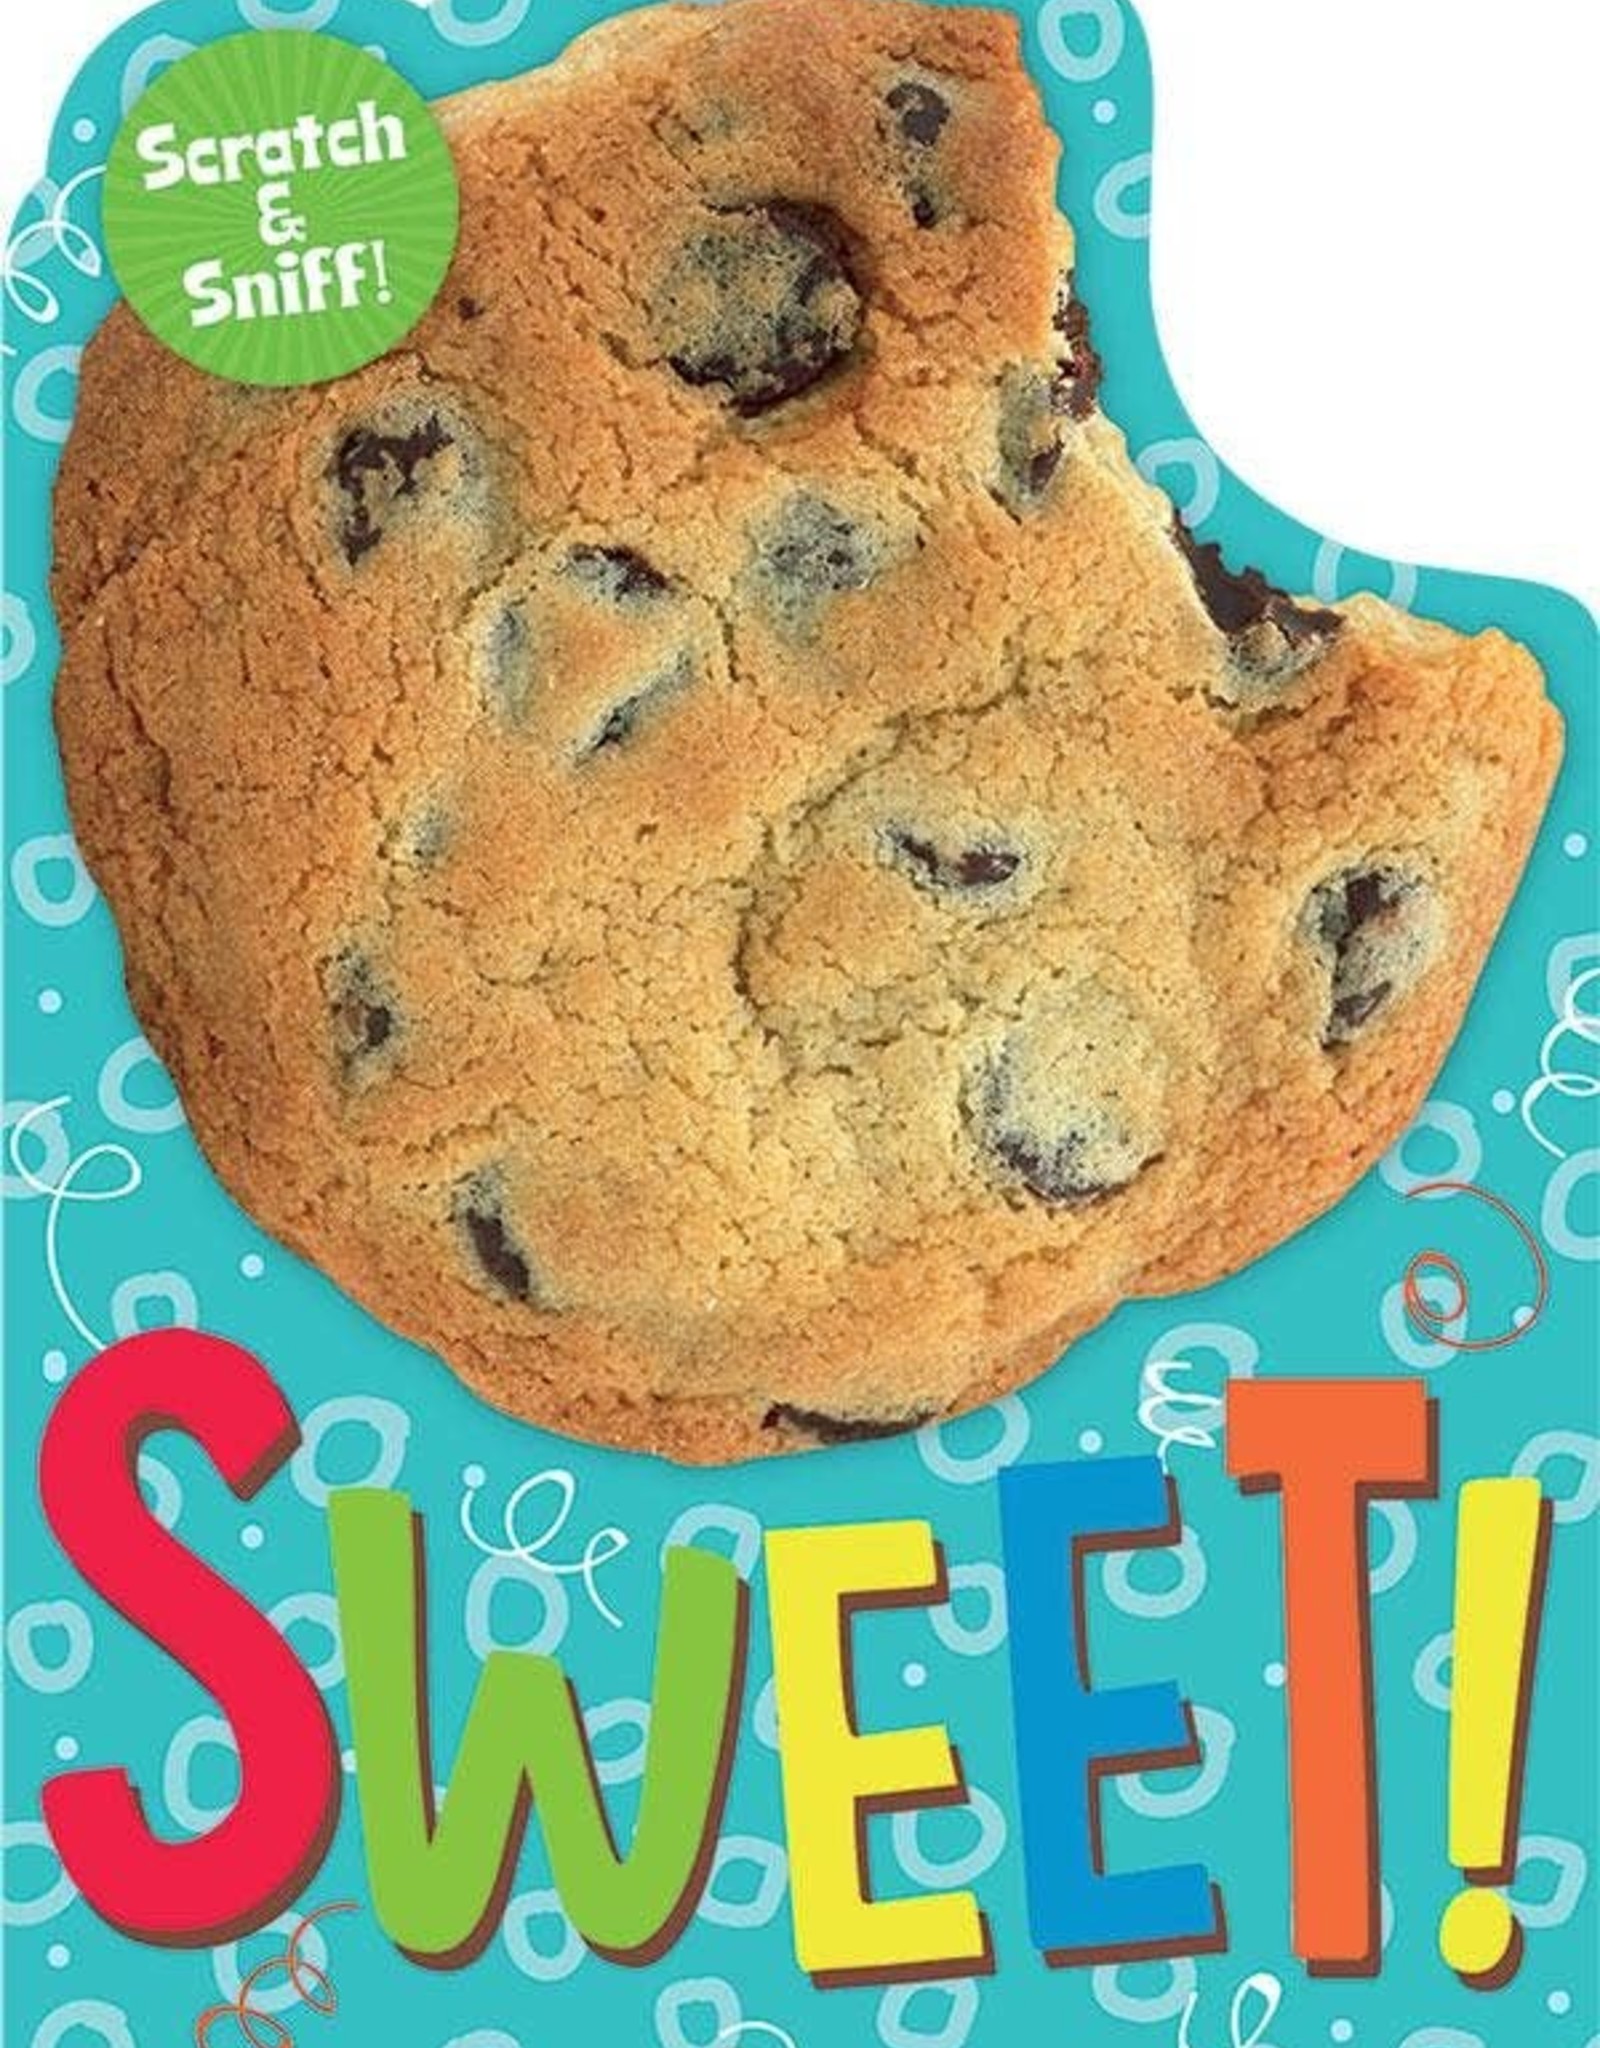 Paper House Cookie Scratch & Sniff Card - Chocolate